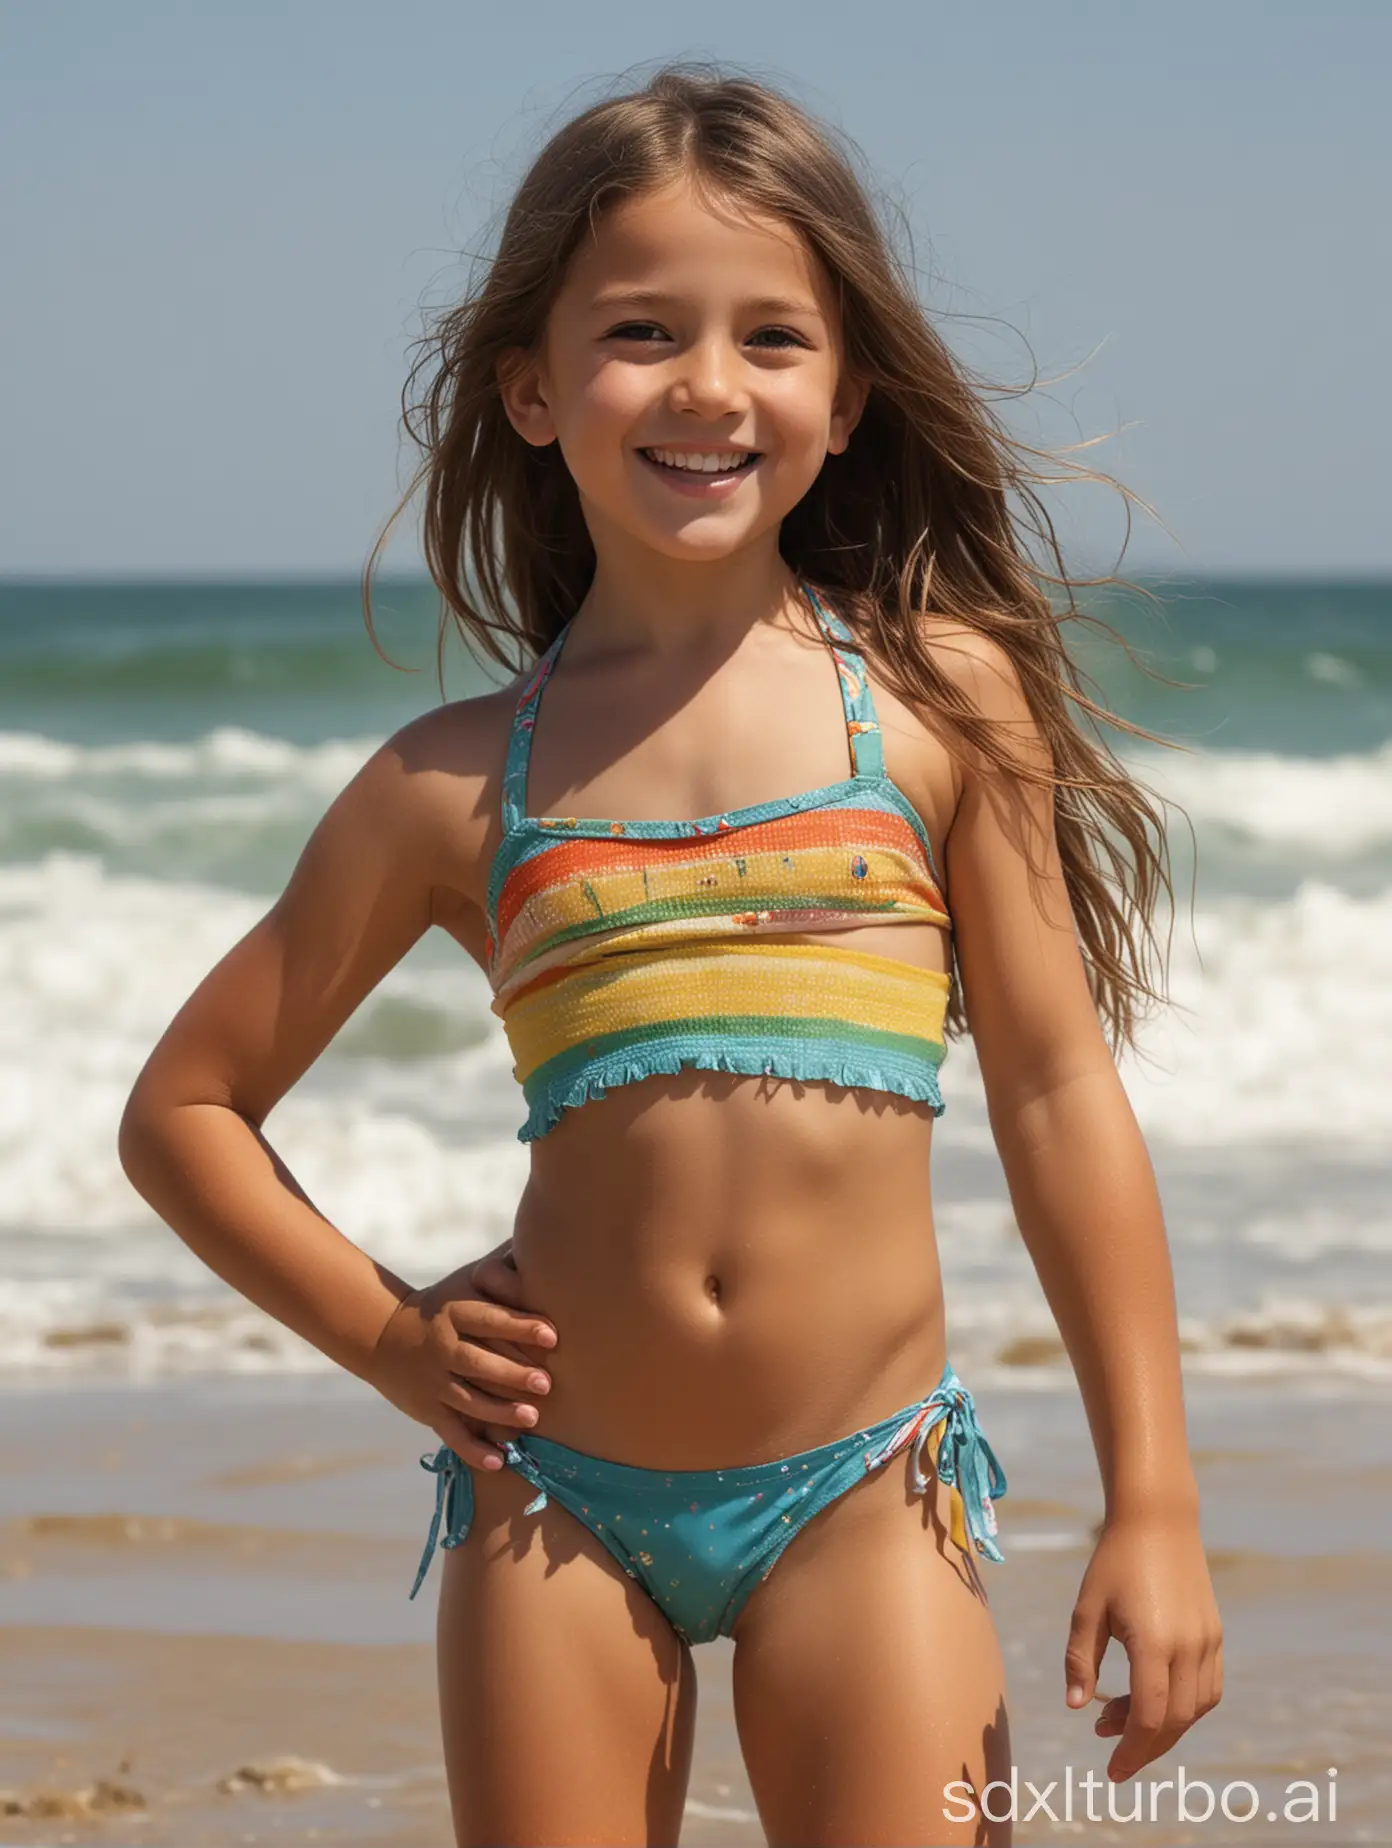 Subject: The main subject of the image is a 9-year-old girl.nSetting: The setting is a beach, indicated by the mention of sand and water.nBackground: The background could feature a sunny beach with waves gently crashing onto the shore, enhancing the summery vibe.nAction: The girl is smiling, indicating joy and contentment. She might be posing confidently to showcase her muscular abs, suggesting pride or confidence.nItems: The girl is wearing a string tiny bikini, emphasizing her physique.nCostume/Appearance: The girl has long hair and wears a string tiny bikini, typical attire for a beach day. Her smile and confidence could be highlighted in her facial expression and posture.nAccessories: Accessories might include sunglasses, sunscreen, or a beach towel nearby, adding realism to the beach setting.